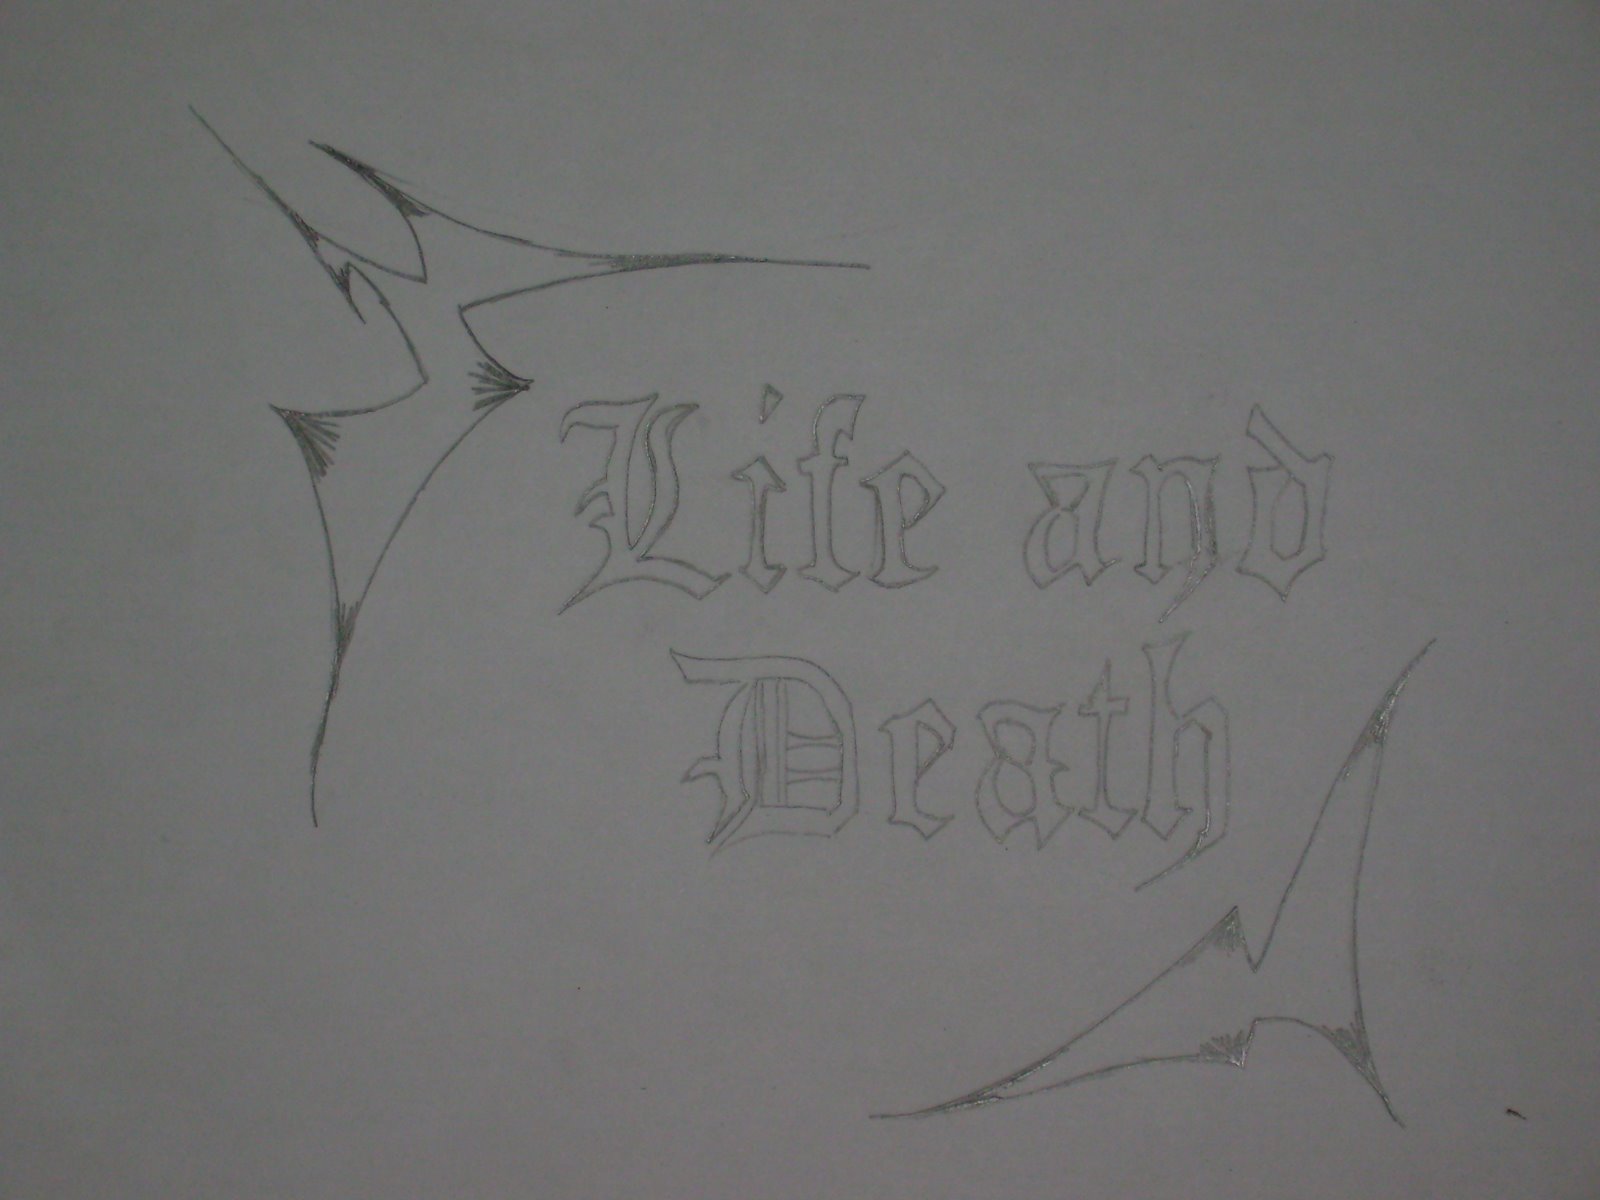 LiFe AnD DeAtH!!!